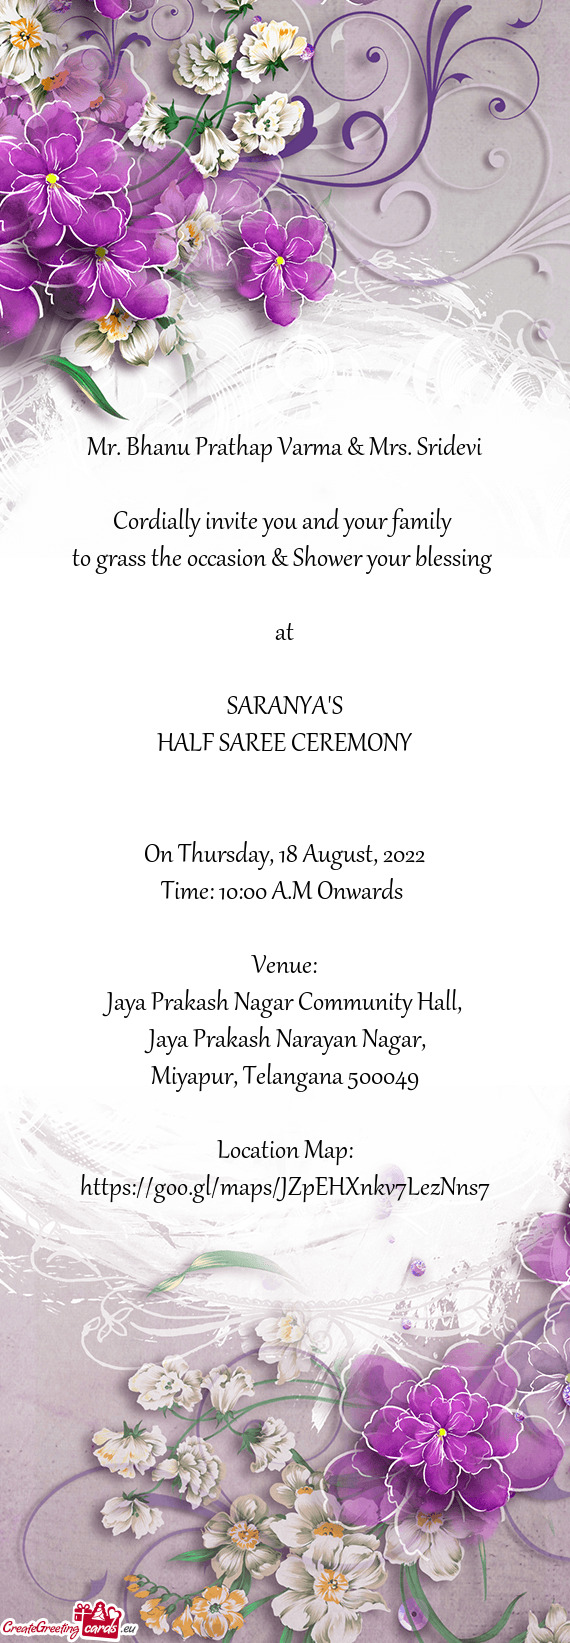 To grass the occasion & Shower your blessing